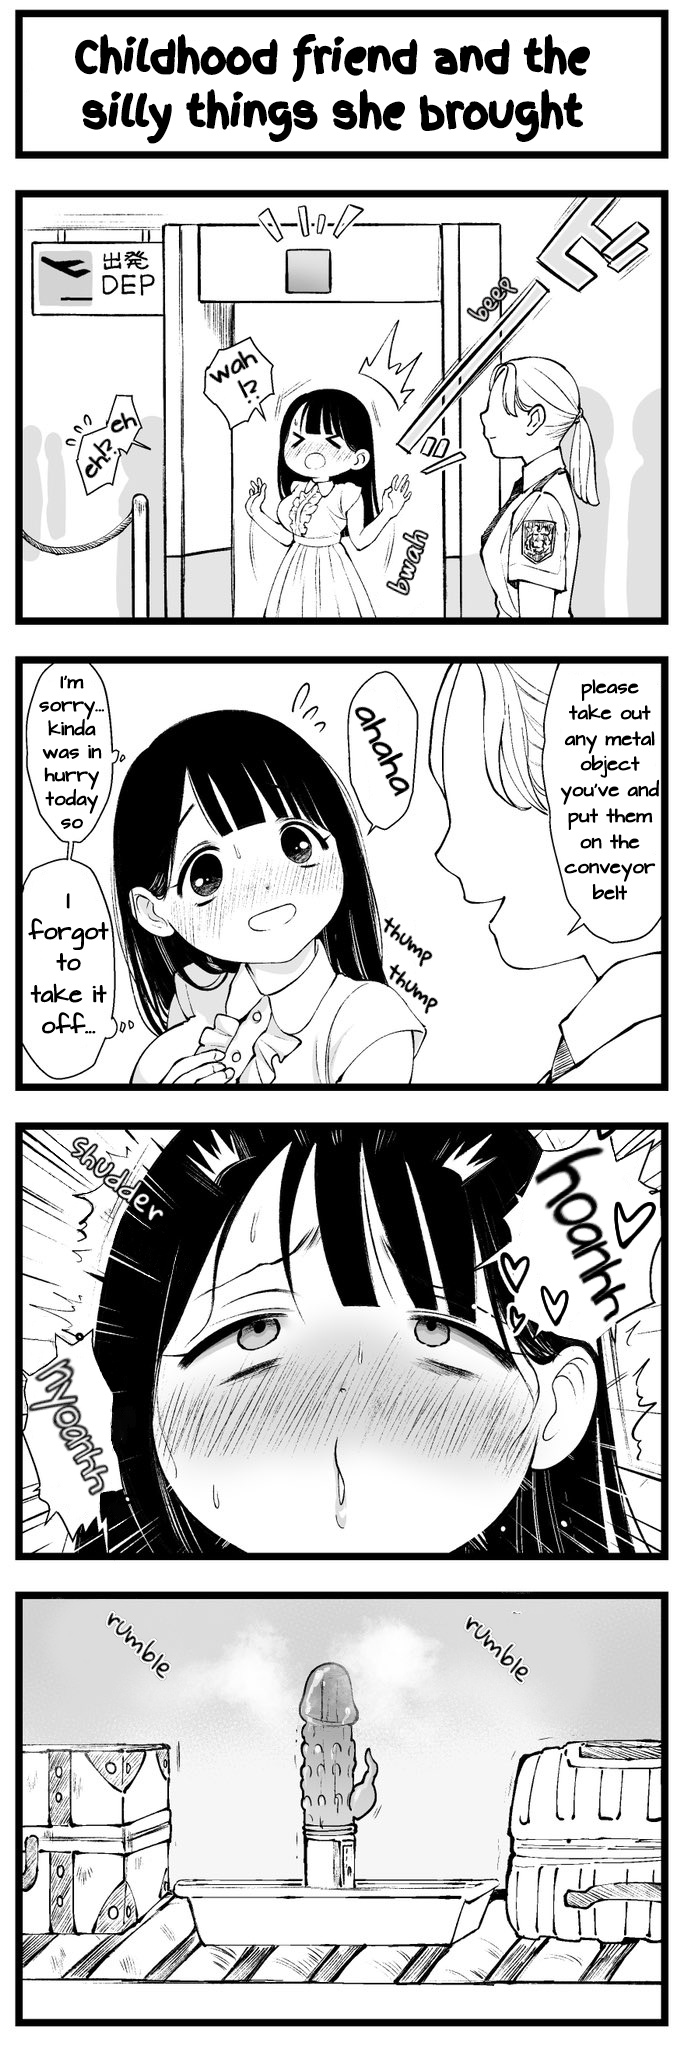 A Childhood Friend Who Gets Horny No Matter How Hard You Try - Page 1